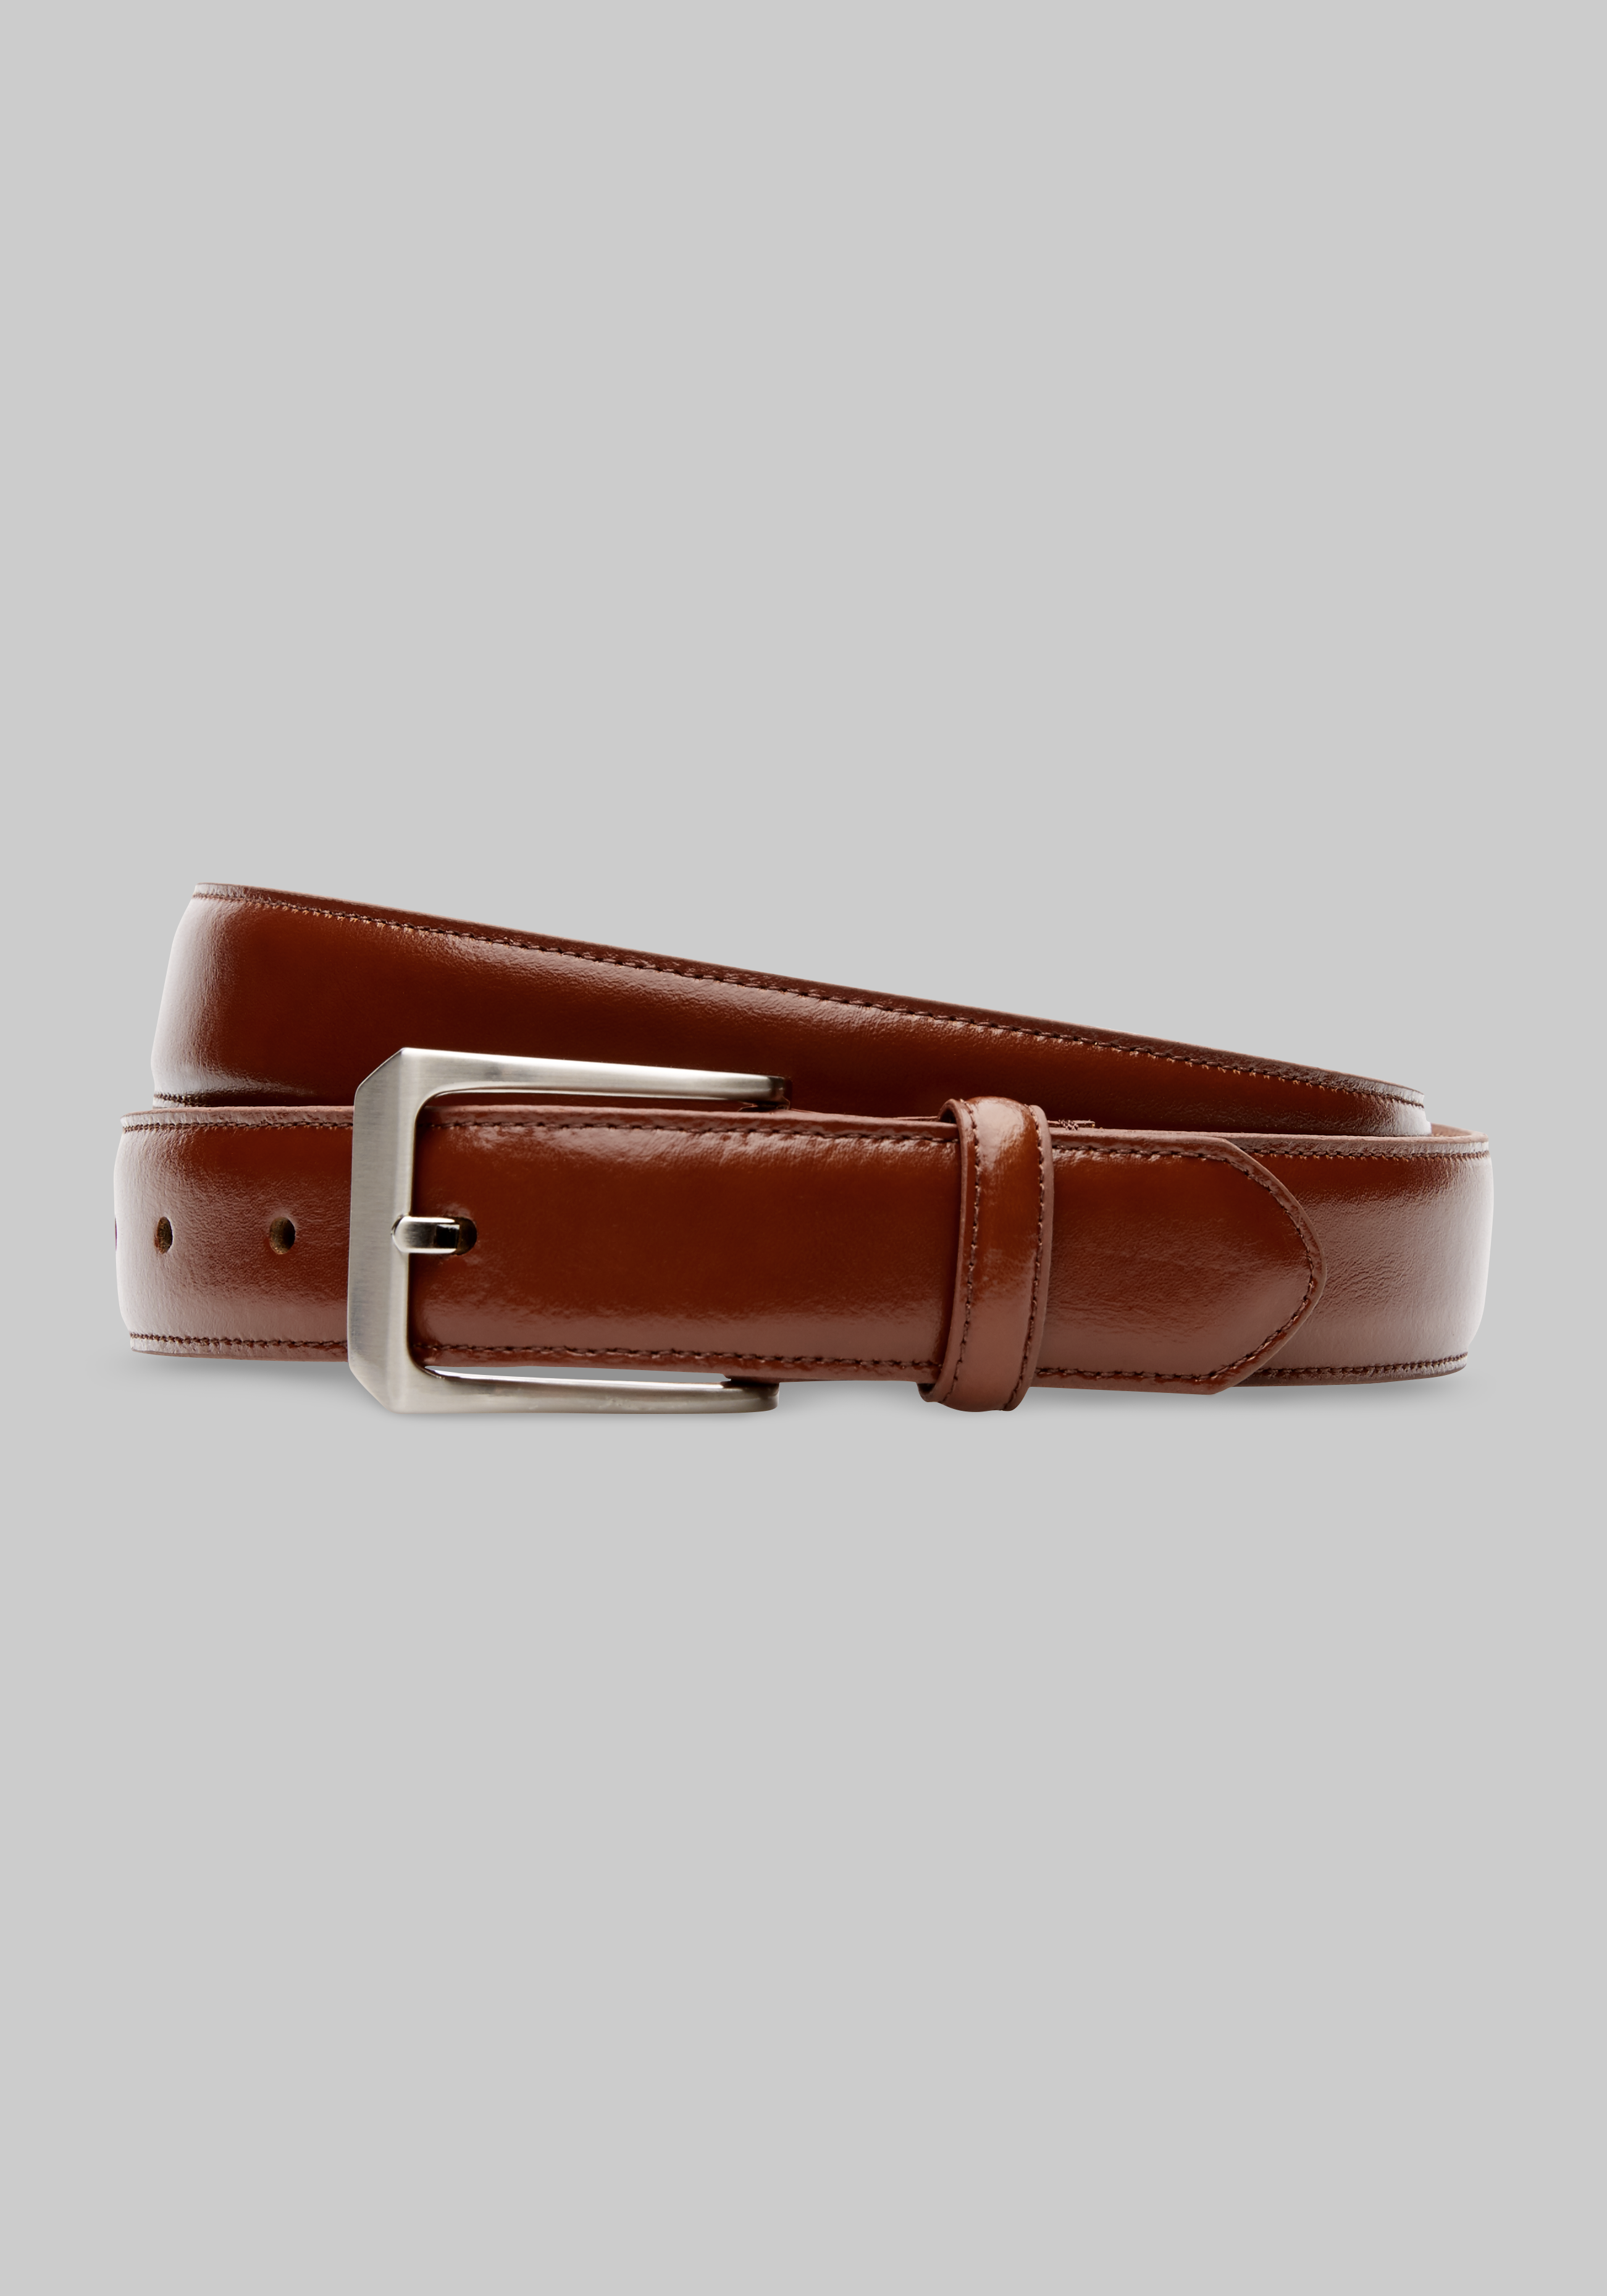 Jos. A. Bank Glazed Leather Belt - Gifts for Dad